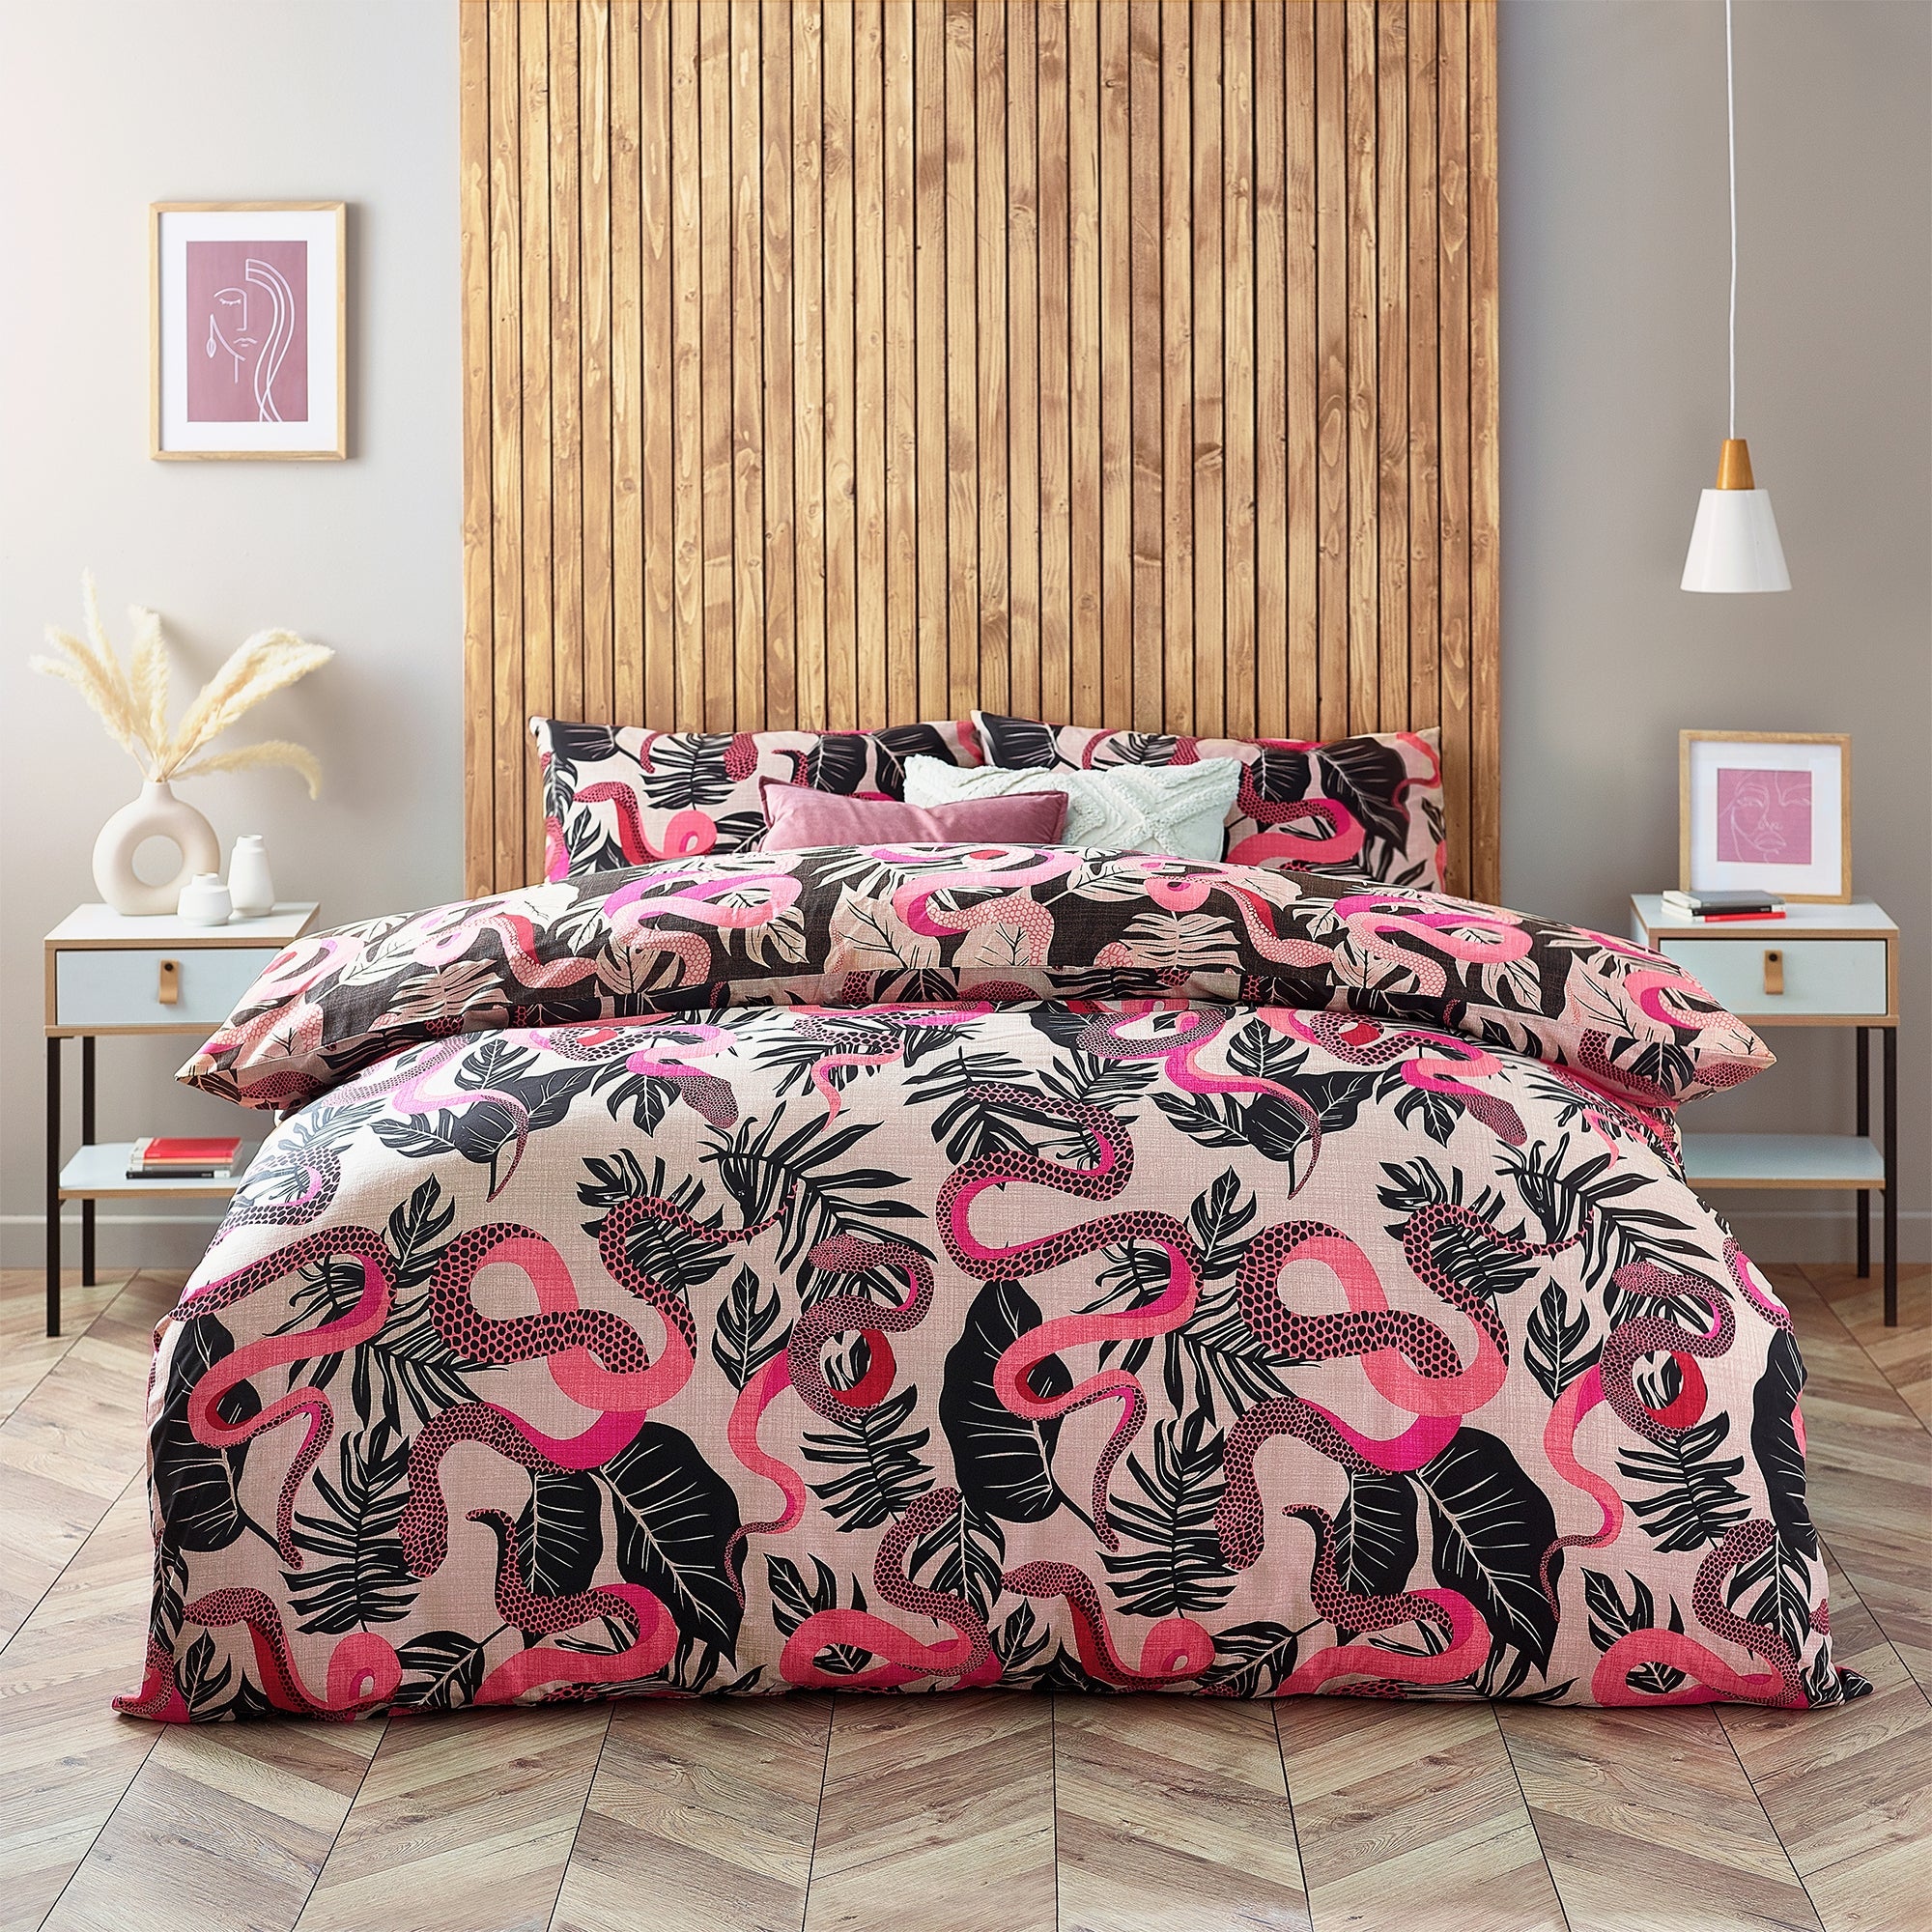 Photos - Bedspread / Coverlet COVER furn. Serpentine Ruby Pink Duvet  and Pillowcase Set Pink 